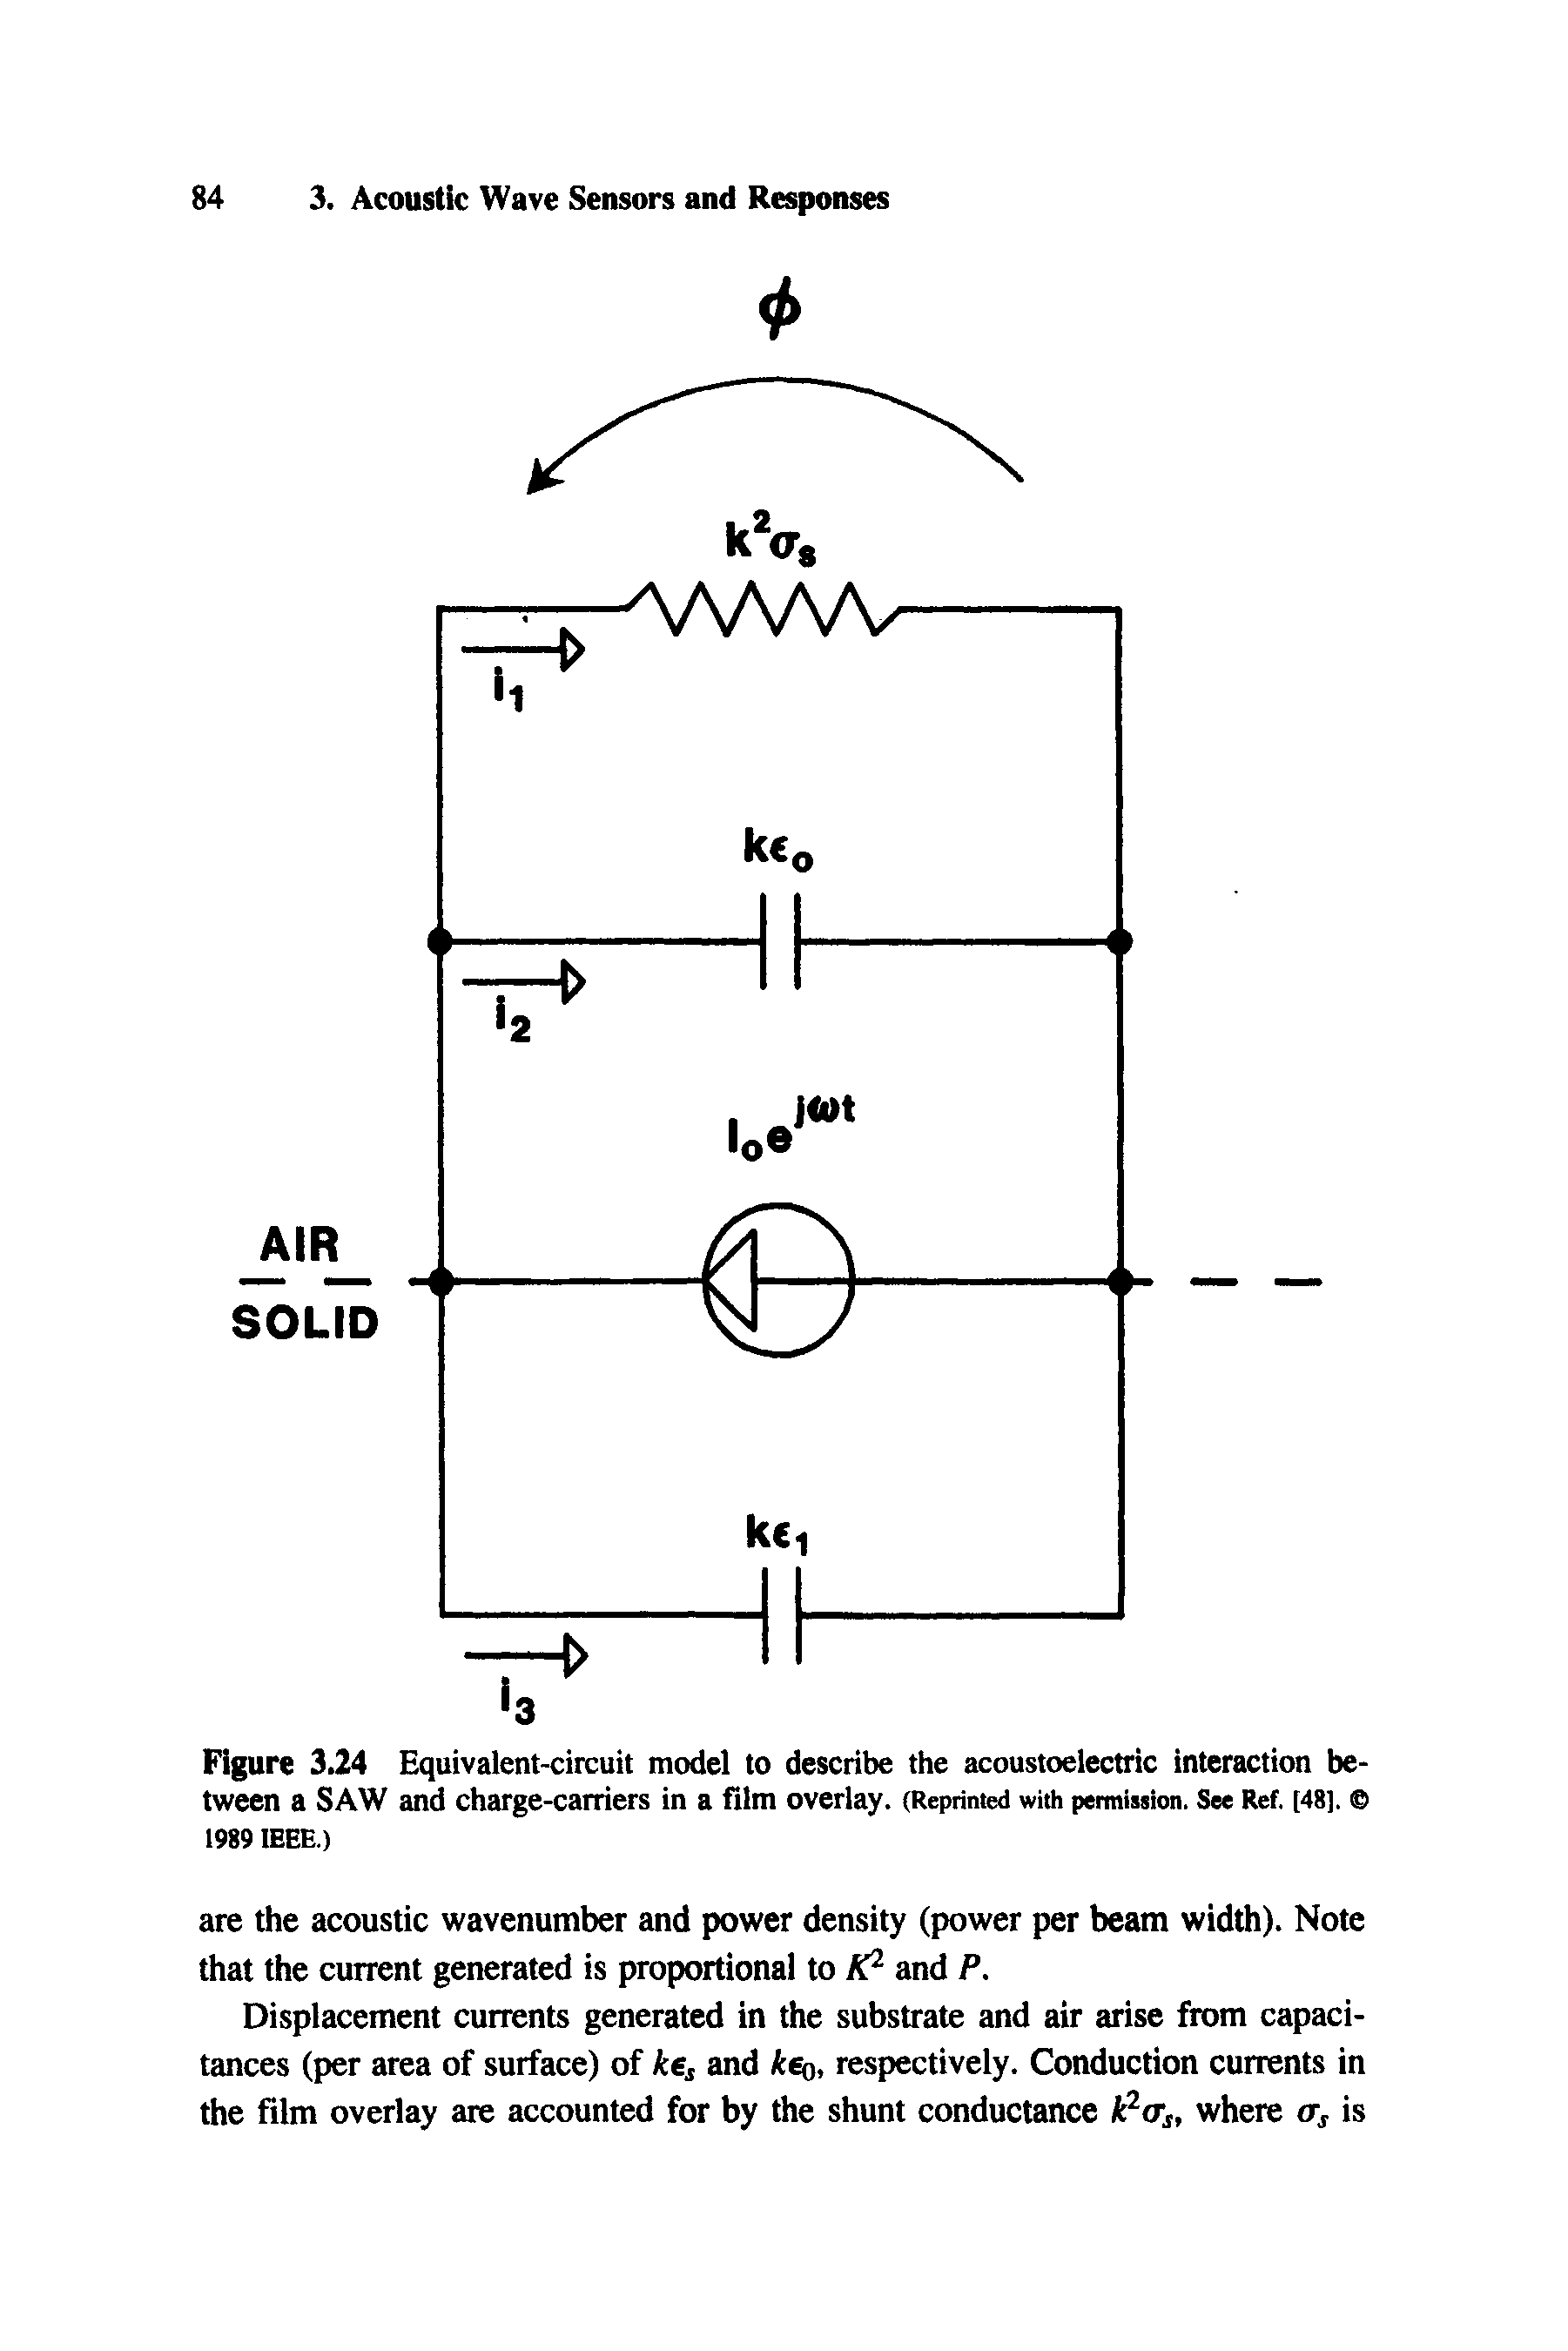 Figure 3.24 Equivalent-circuit model to describe the acoustoelectric interaction between a SAW and charge-carriers in a film overlay. (Reprinted with permiuion, See Ref. [48]. e 1989 IEEE.)...